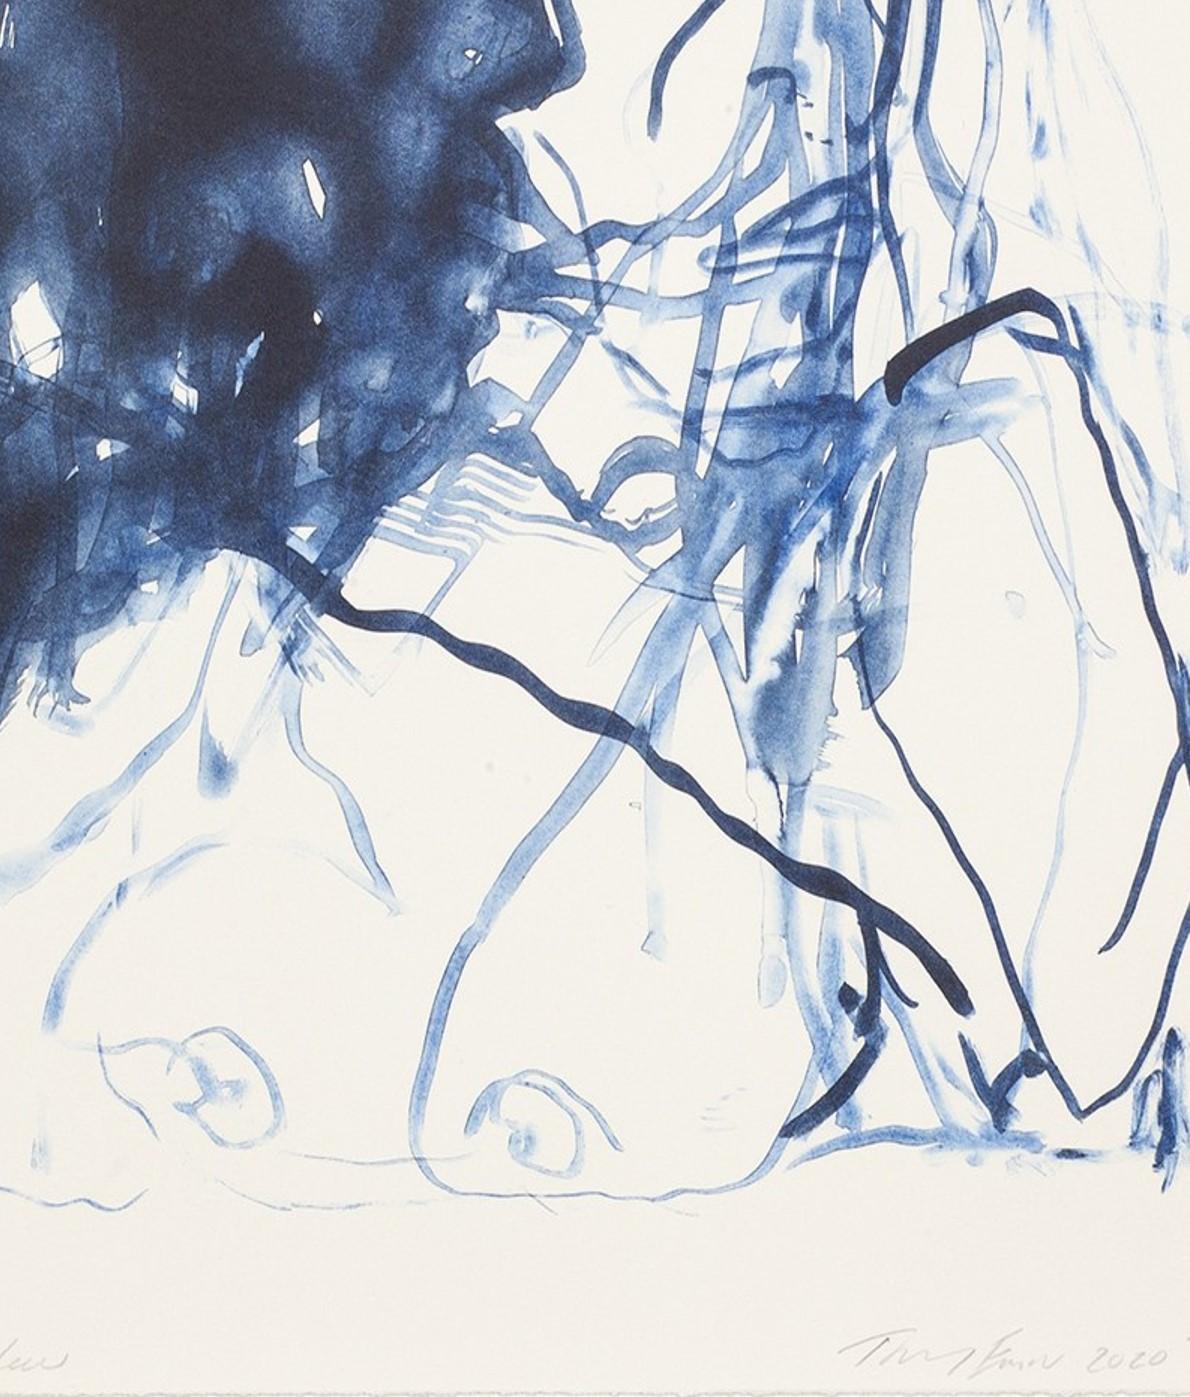 tracey emin paintings